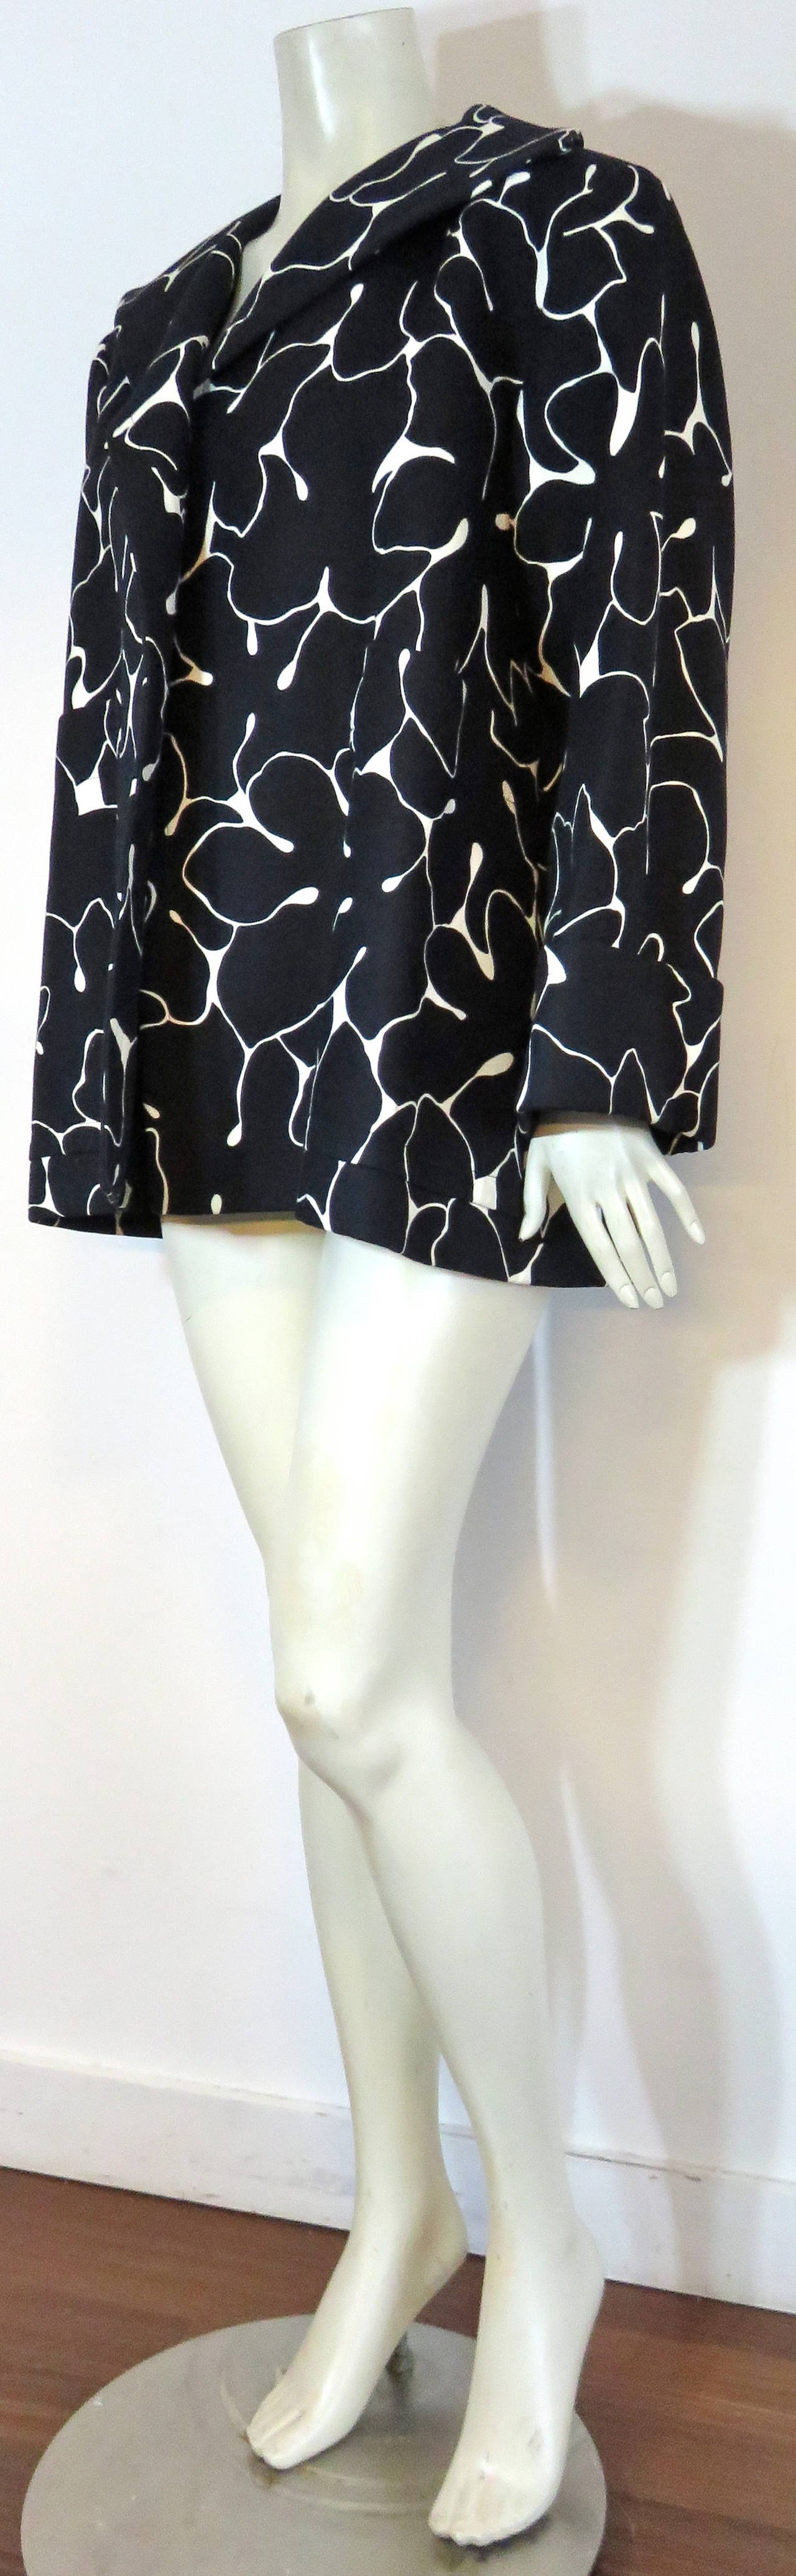 Never worn, 1970's YVES SAINT LAURENT Black & white stroller jacket.

This fabulous coat was designed by Yves Saint Laurent during the late 1970's in France.

This coat was never worn, and has a crisp, 'new' appearance with absolutely no